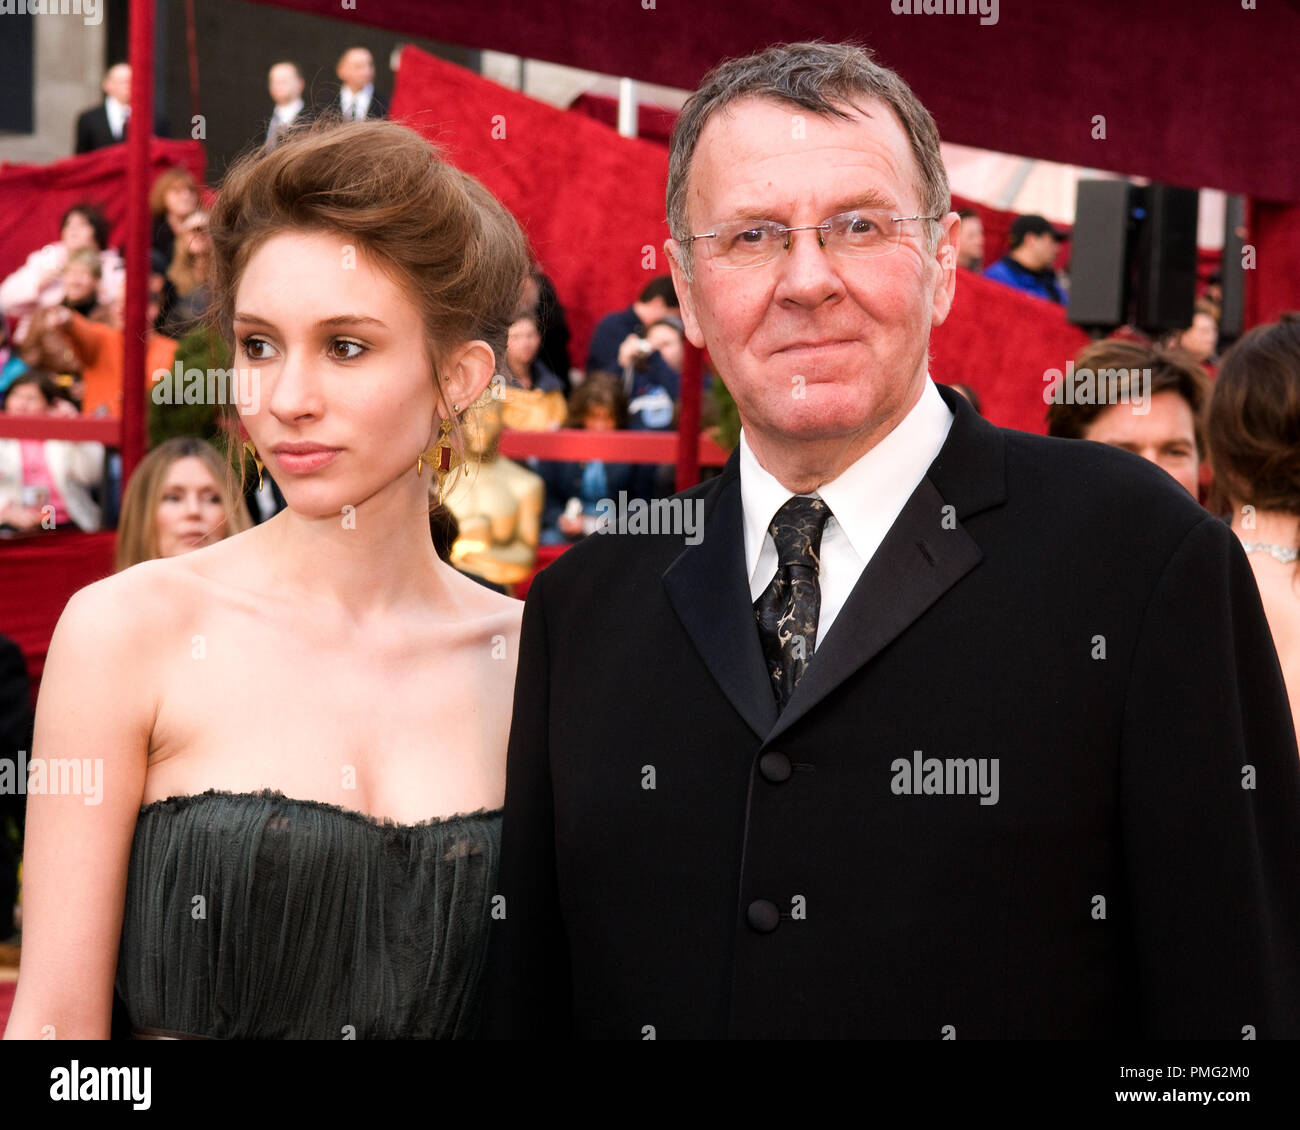 The Academy of Motion Picture Arts and Sciences Presents "Academy Awards -  80th Annual" Tom Wilkinson and daughter Alice Wilkinson 2-24-08 File  Reference # 30000 067 For Editorial Use Only - All Rights Reserved Stock  Photo - Alamy